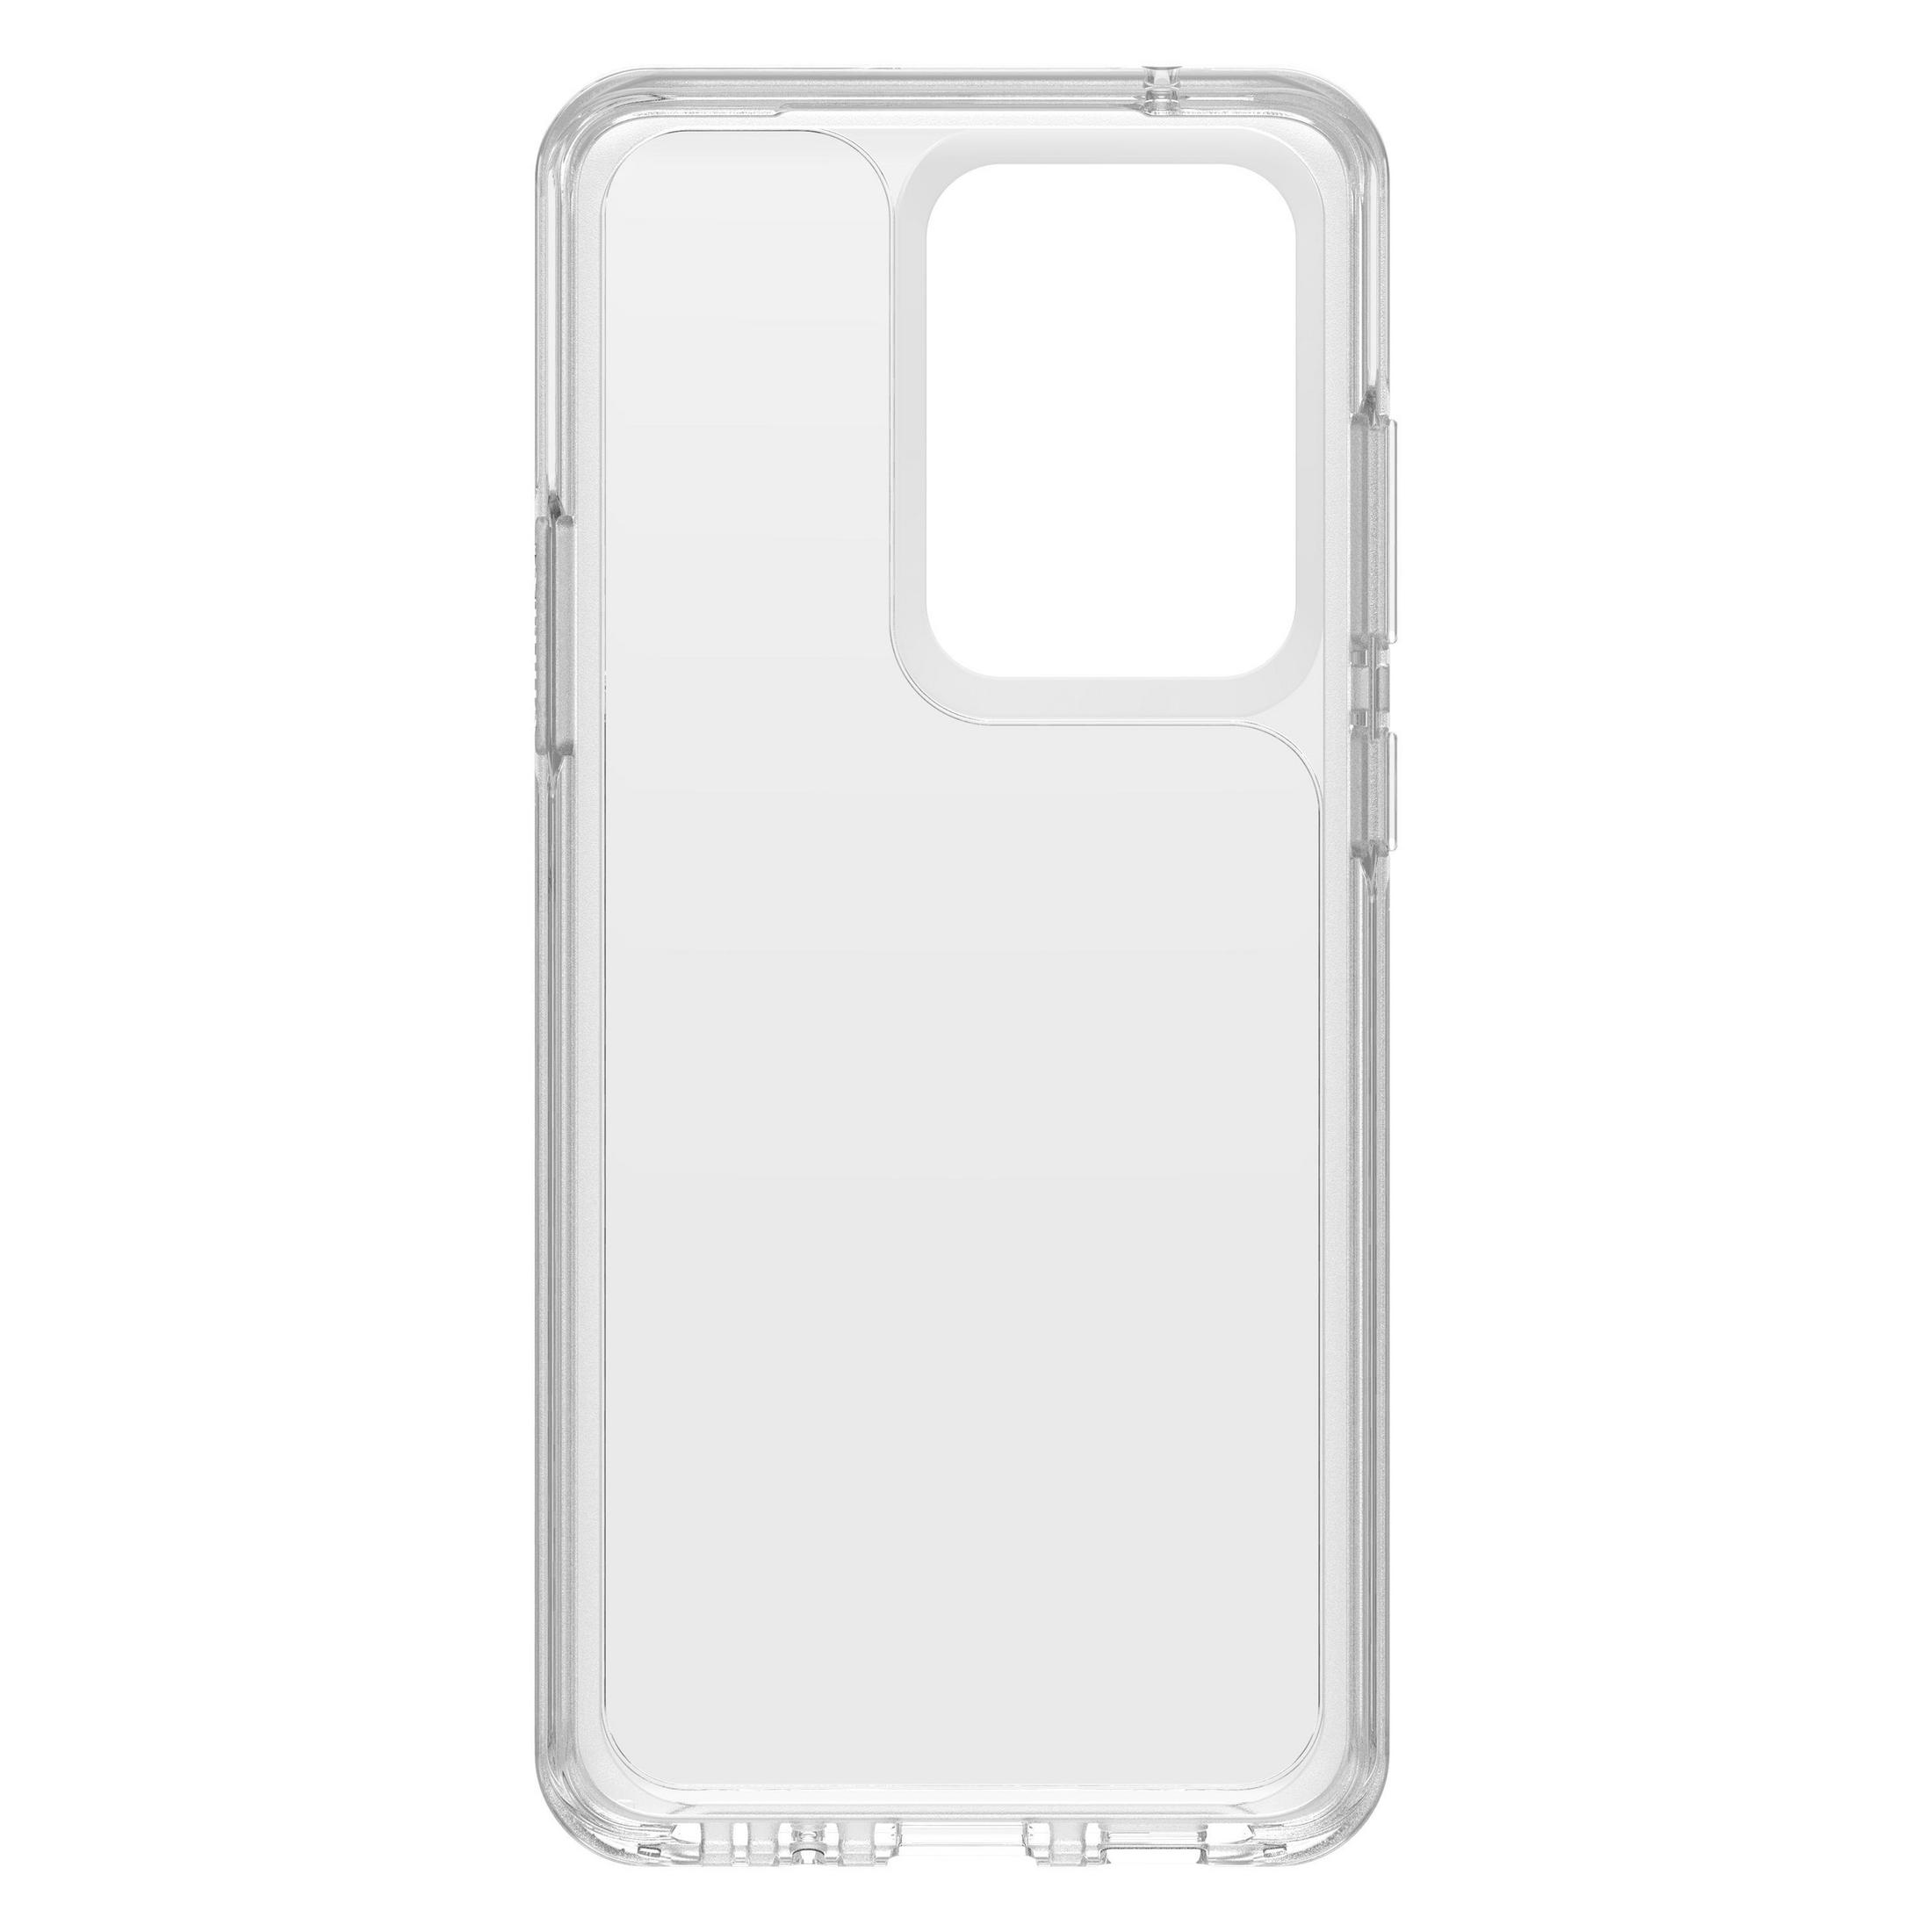 ULTRA S20 Samsung, CLEAR, Galaxy Transparent S20 77-64295 Backcover, SYMMETRY Ultra, OTTERBOX